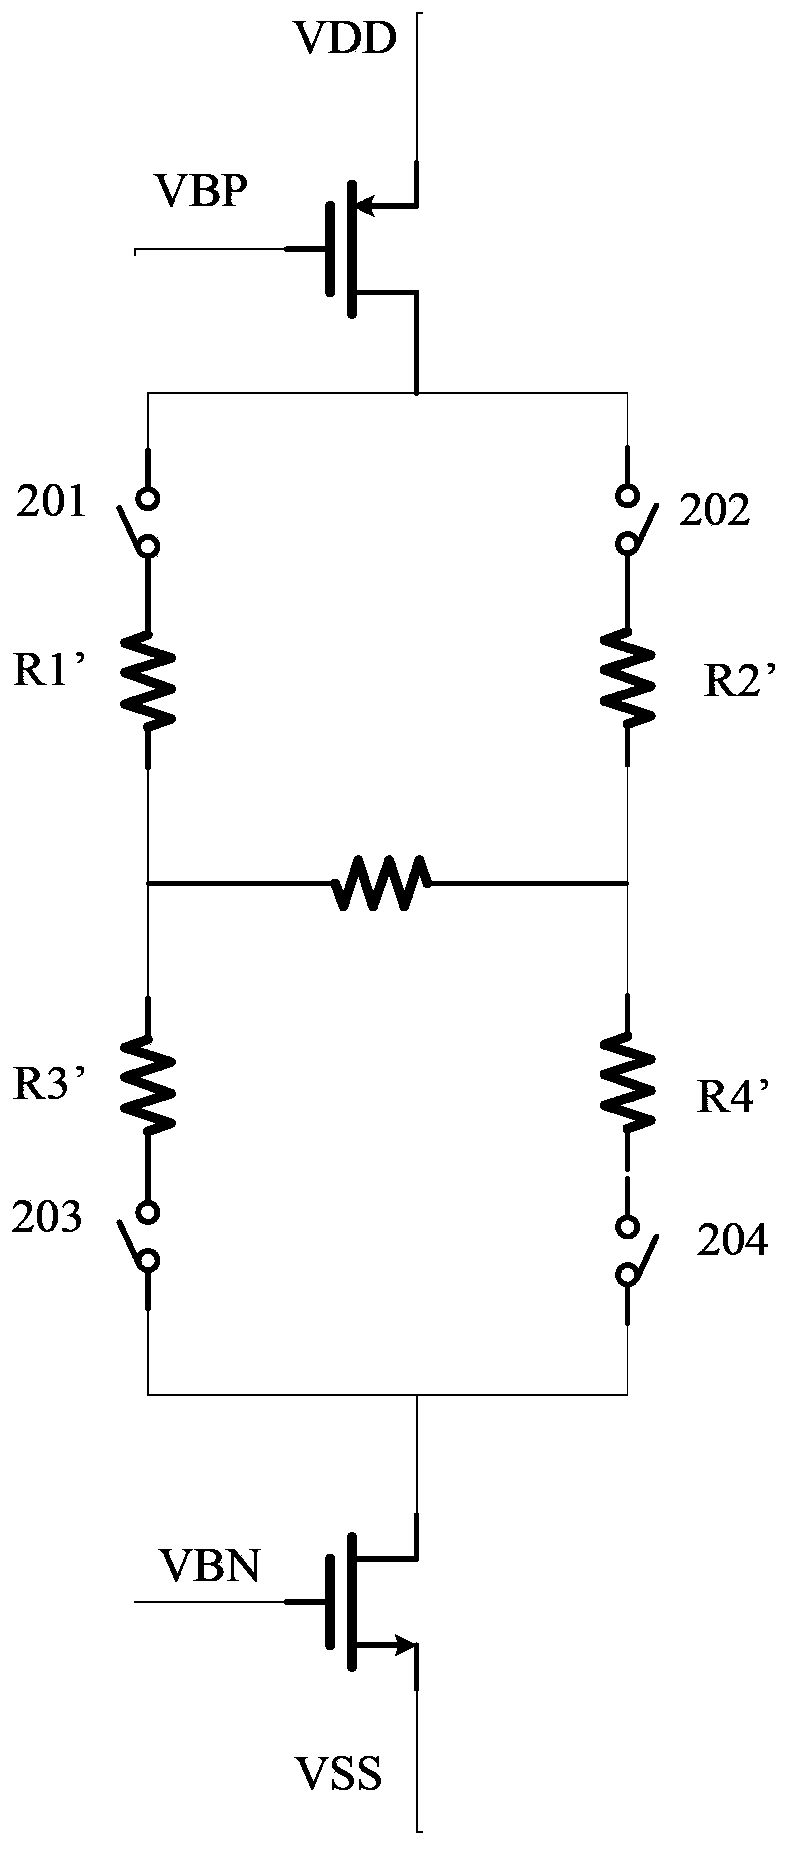 Low voltage difference signal LVDS composition circuit